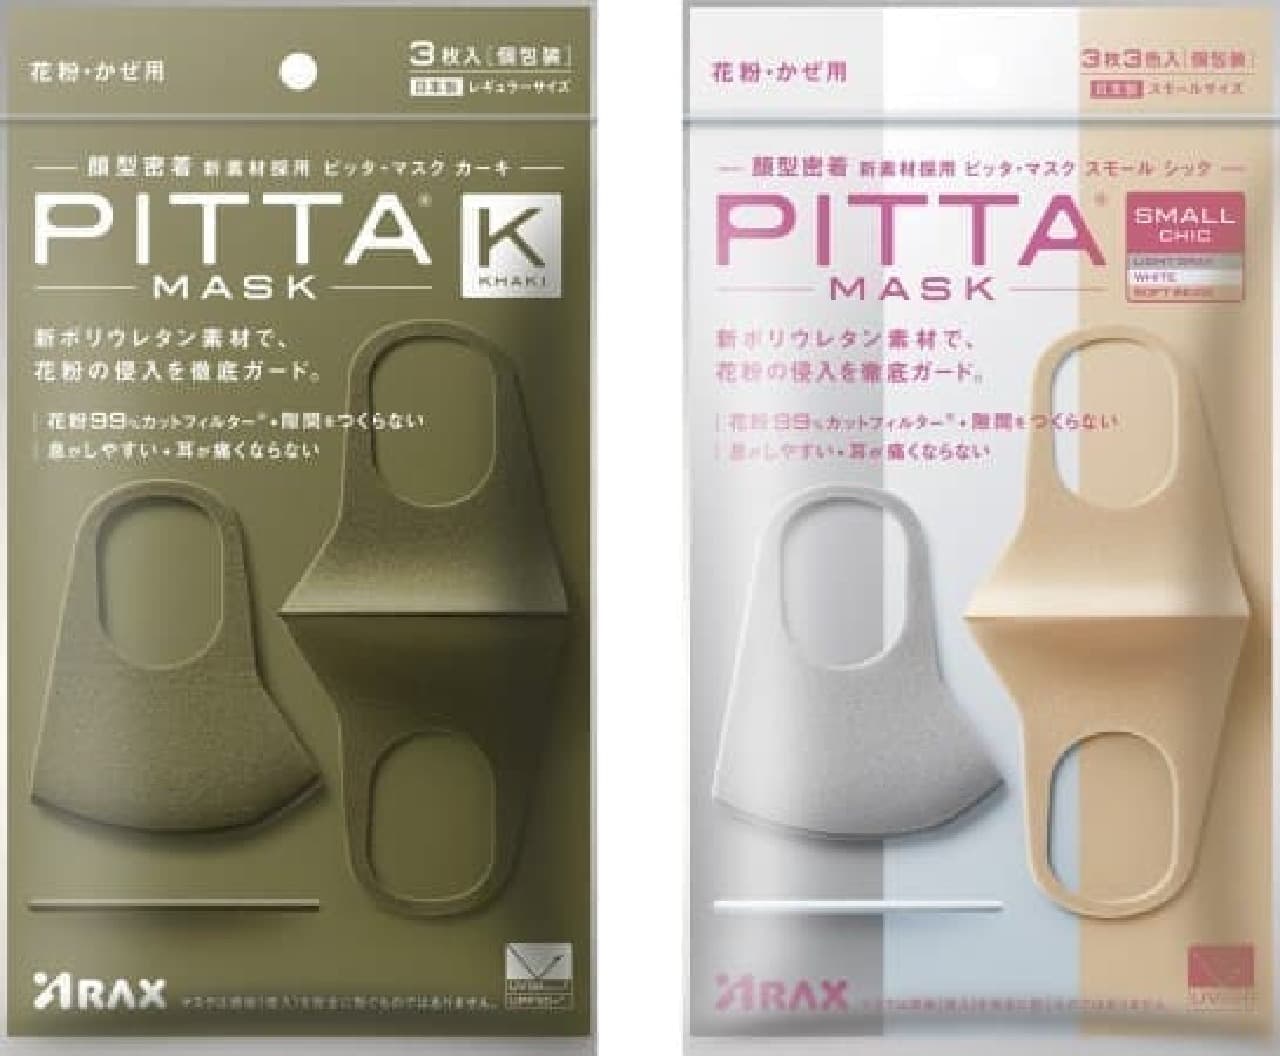 Pitta mask new color